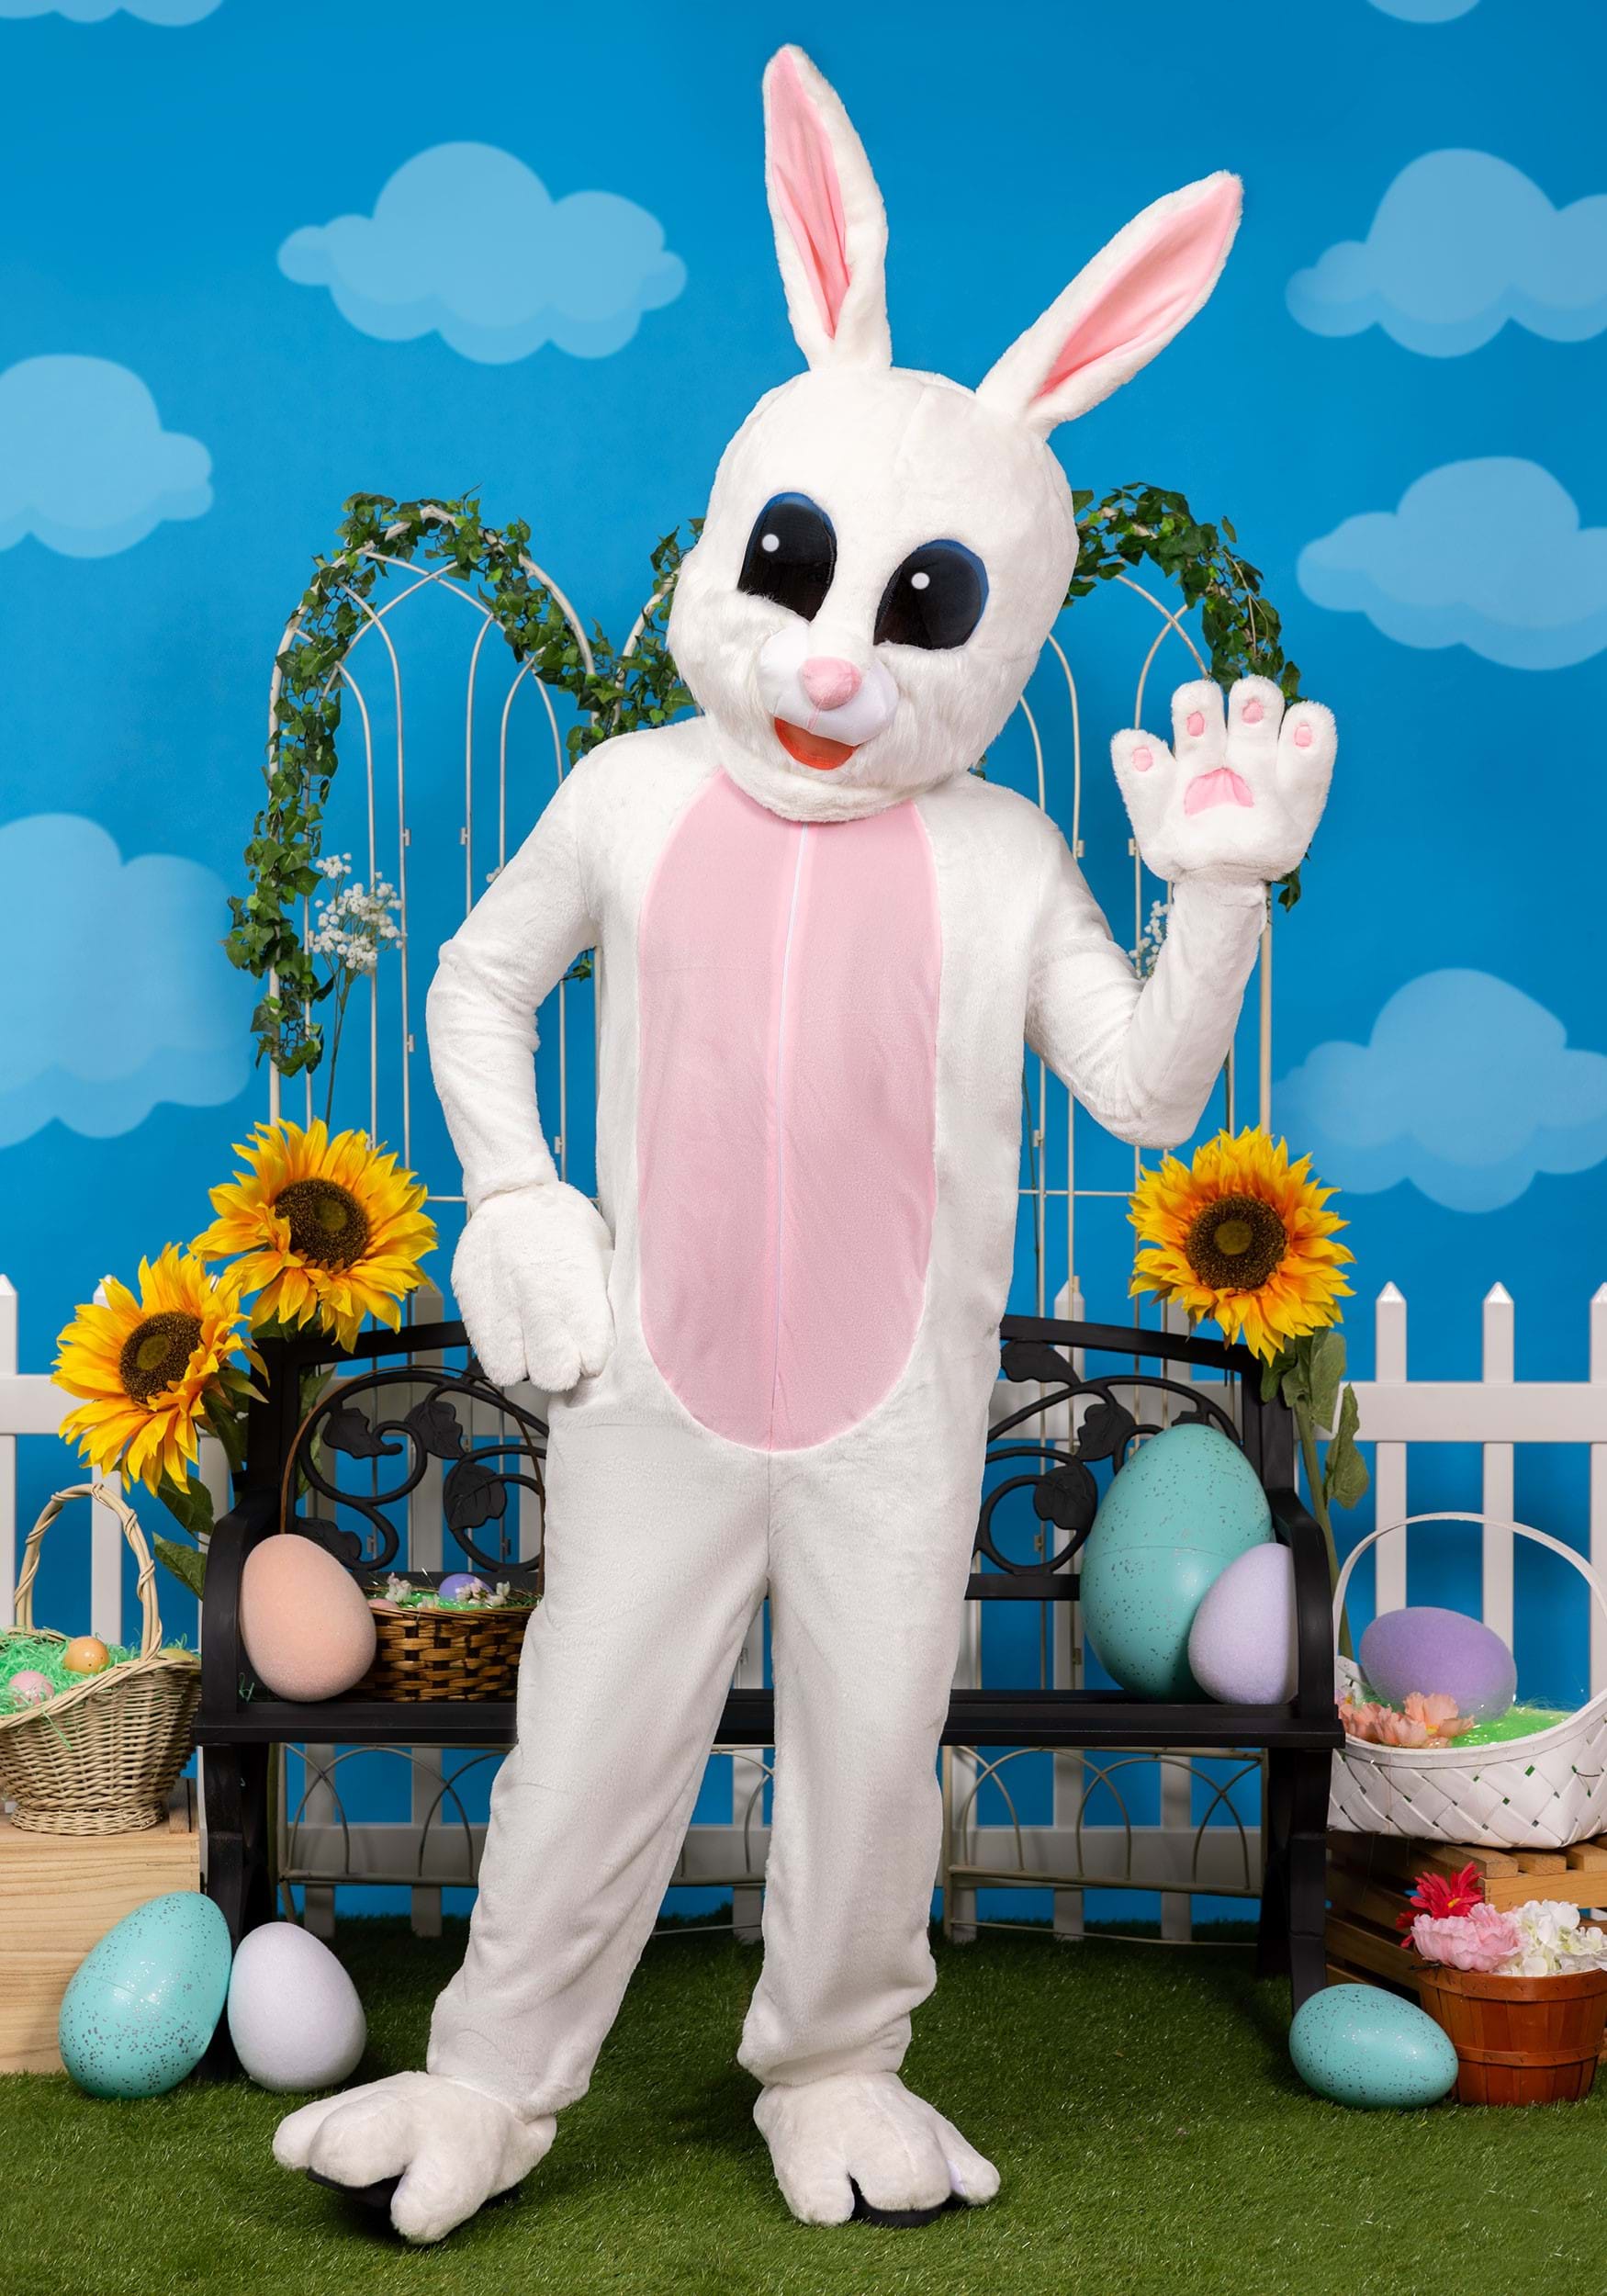 https://images.halloweencostumes.ca/products/46111/1-1/adult-easter-bunny-mascot-costume.jpg